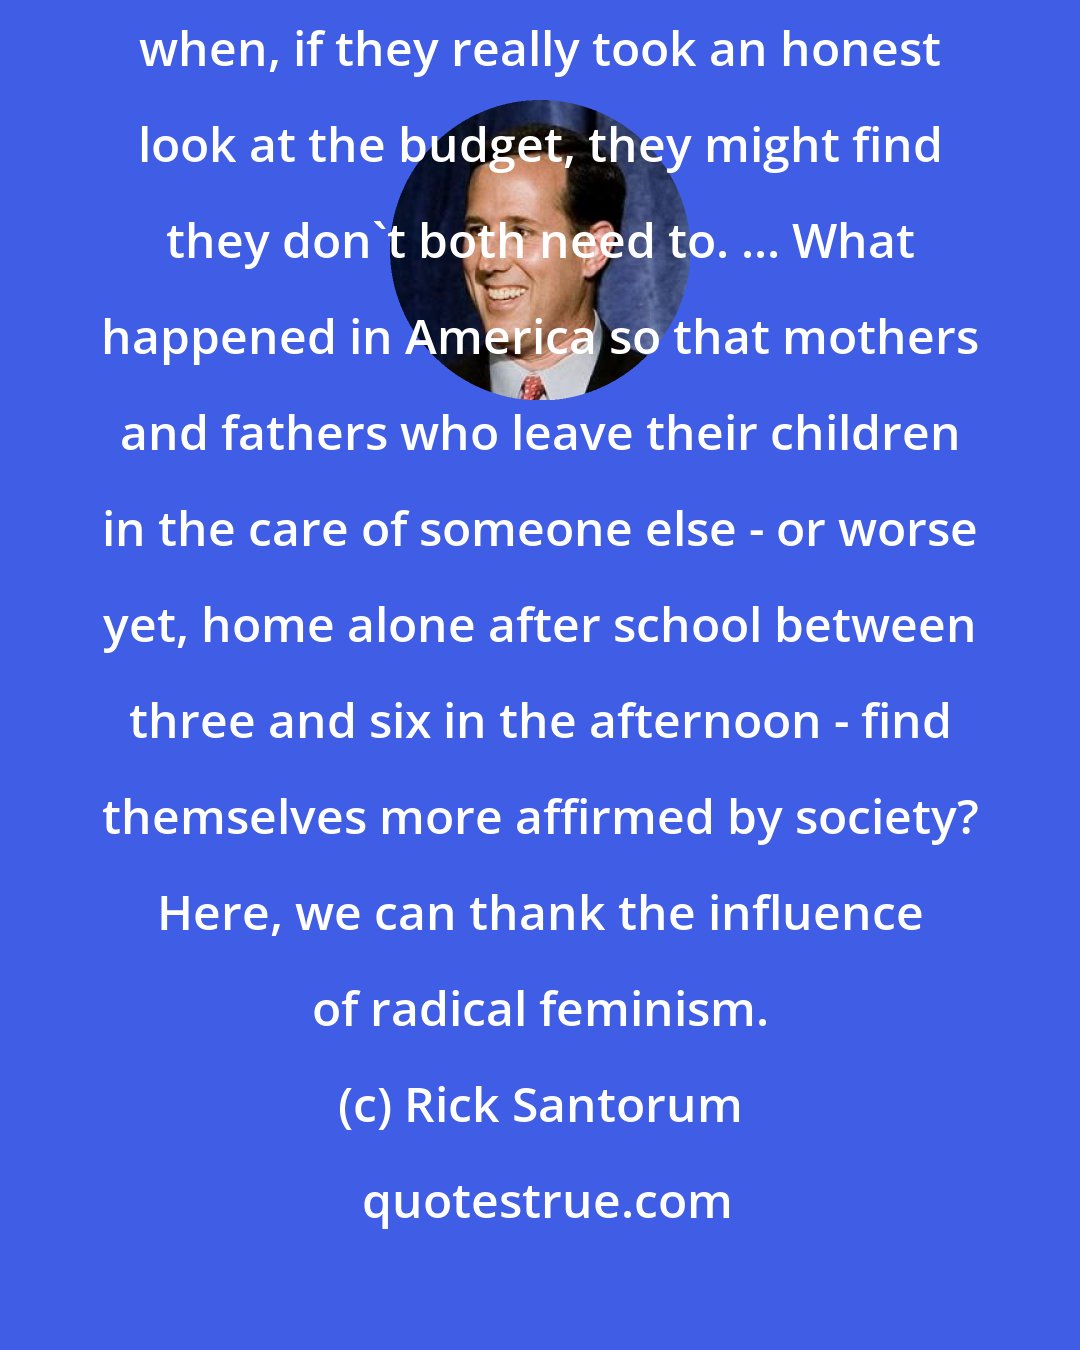 Rick Santorum: In far too many families with young children, both parents are working, when, if they really took an honest look at the budget, they might find they don't both need to. ... What happened in America so that mothers and fathers who leave their children in the care of someone else - or worse yet, home alone after school between three and six in the afternoon - find themselves more affirmed by society? Here, we can thank the influence of radical feminism.